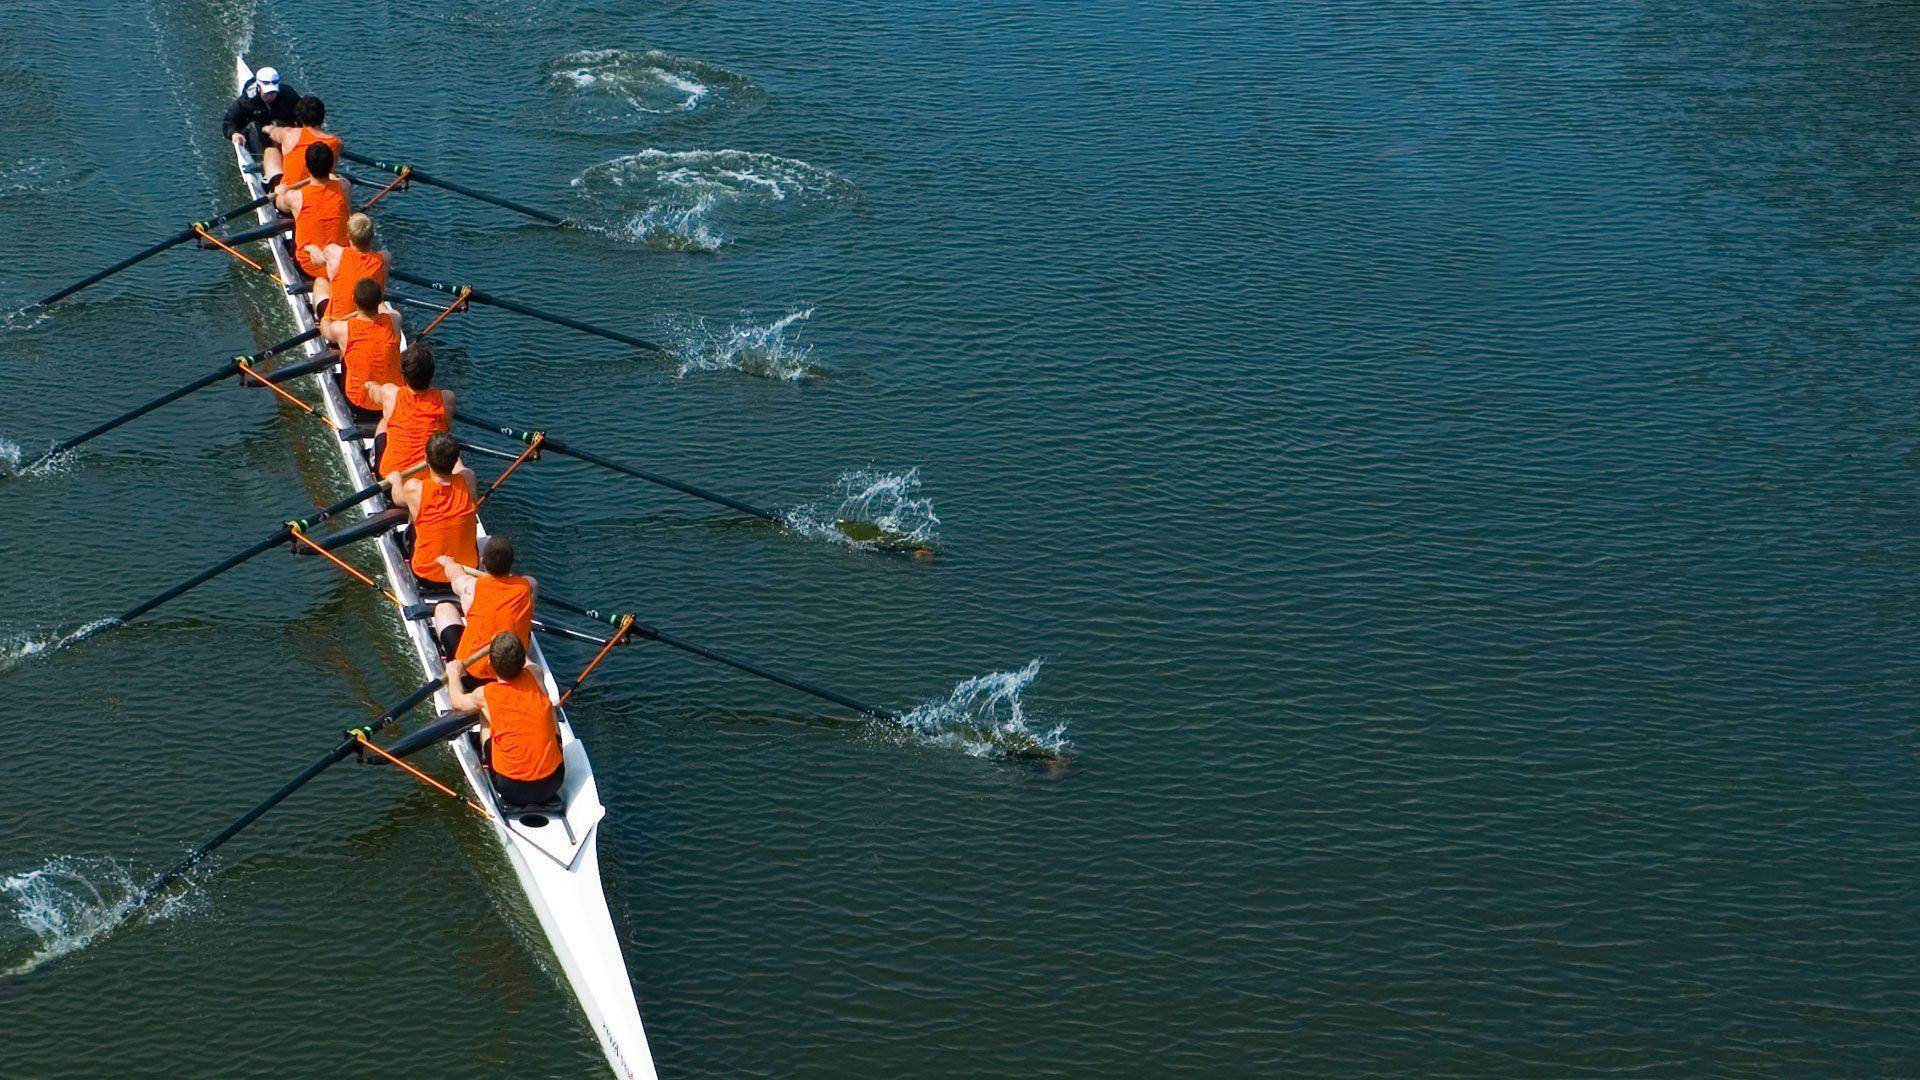 Determined Rowing Team in Action Wallpaper